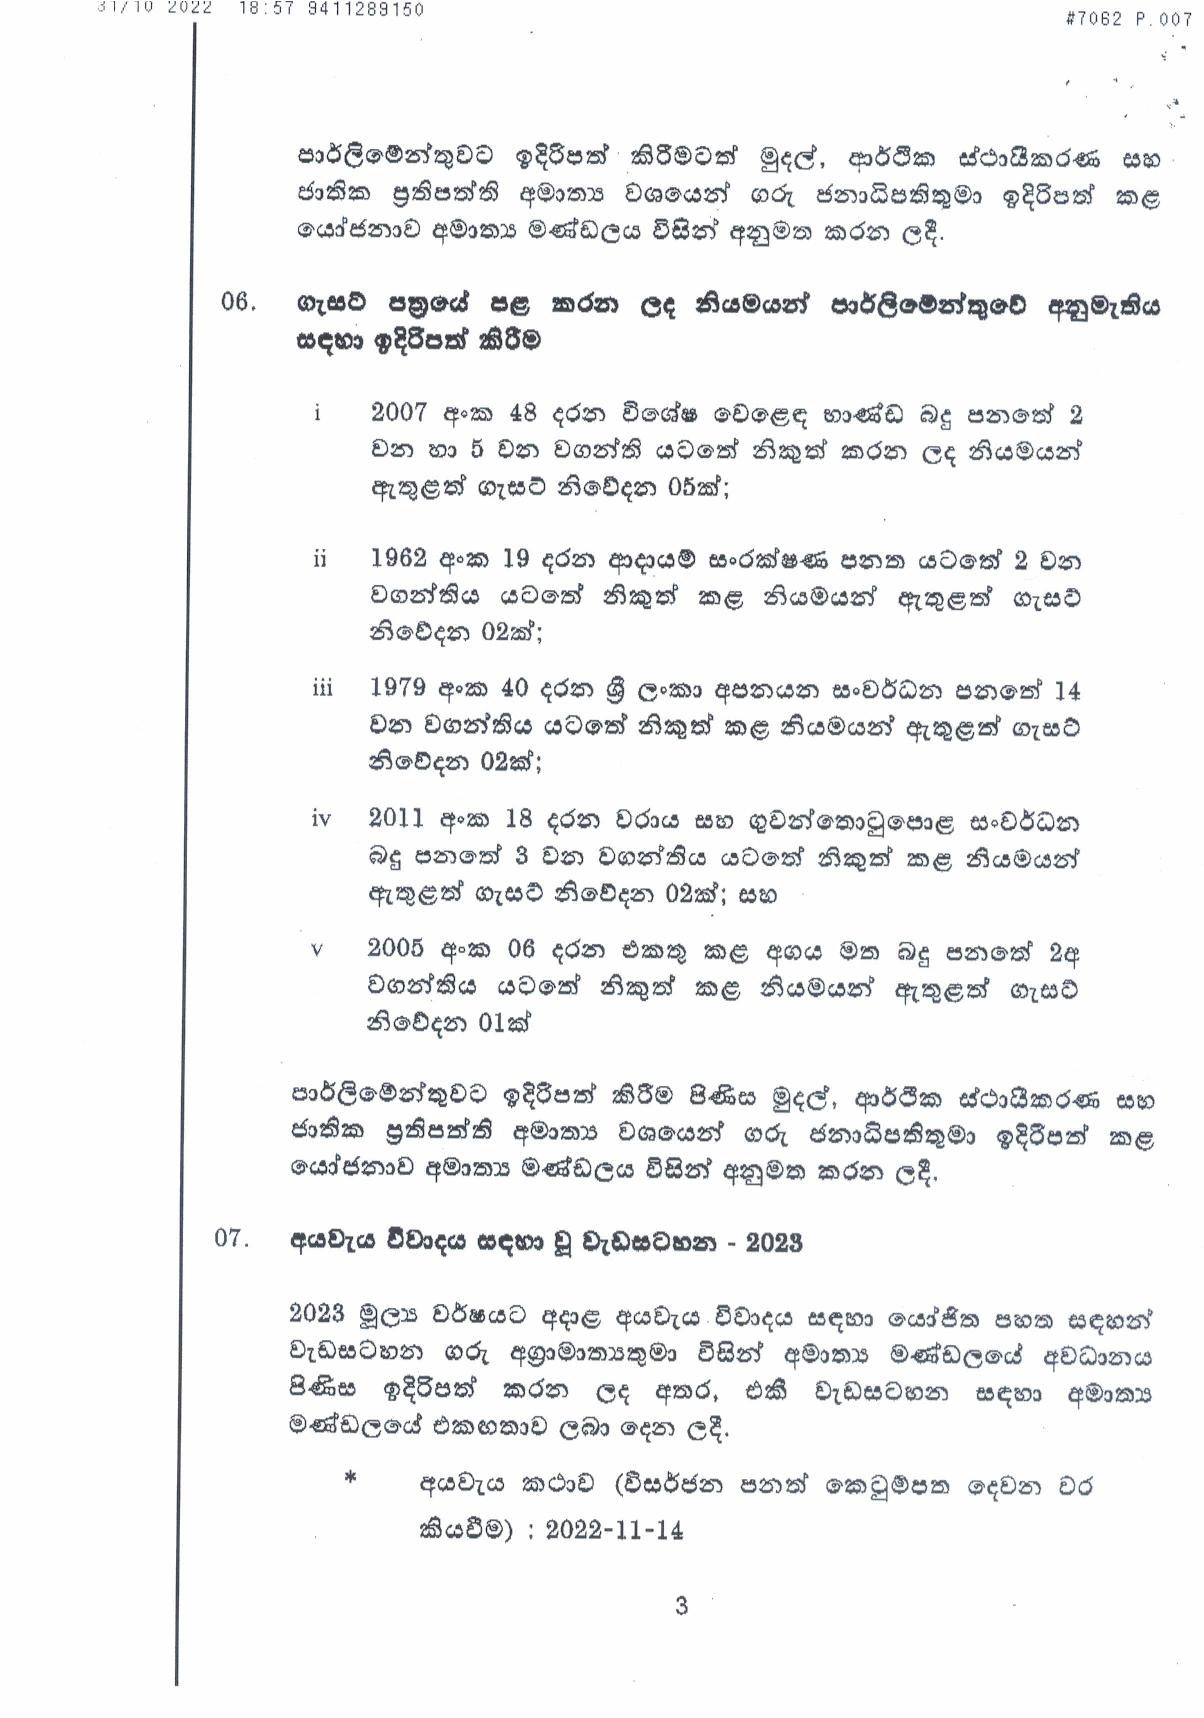 Cabinet Decisions on 31.10.2022 page 003